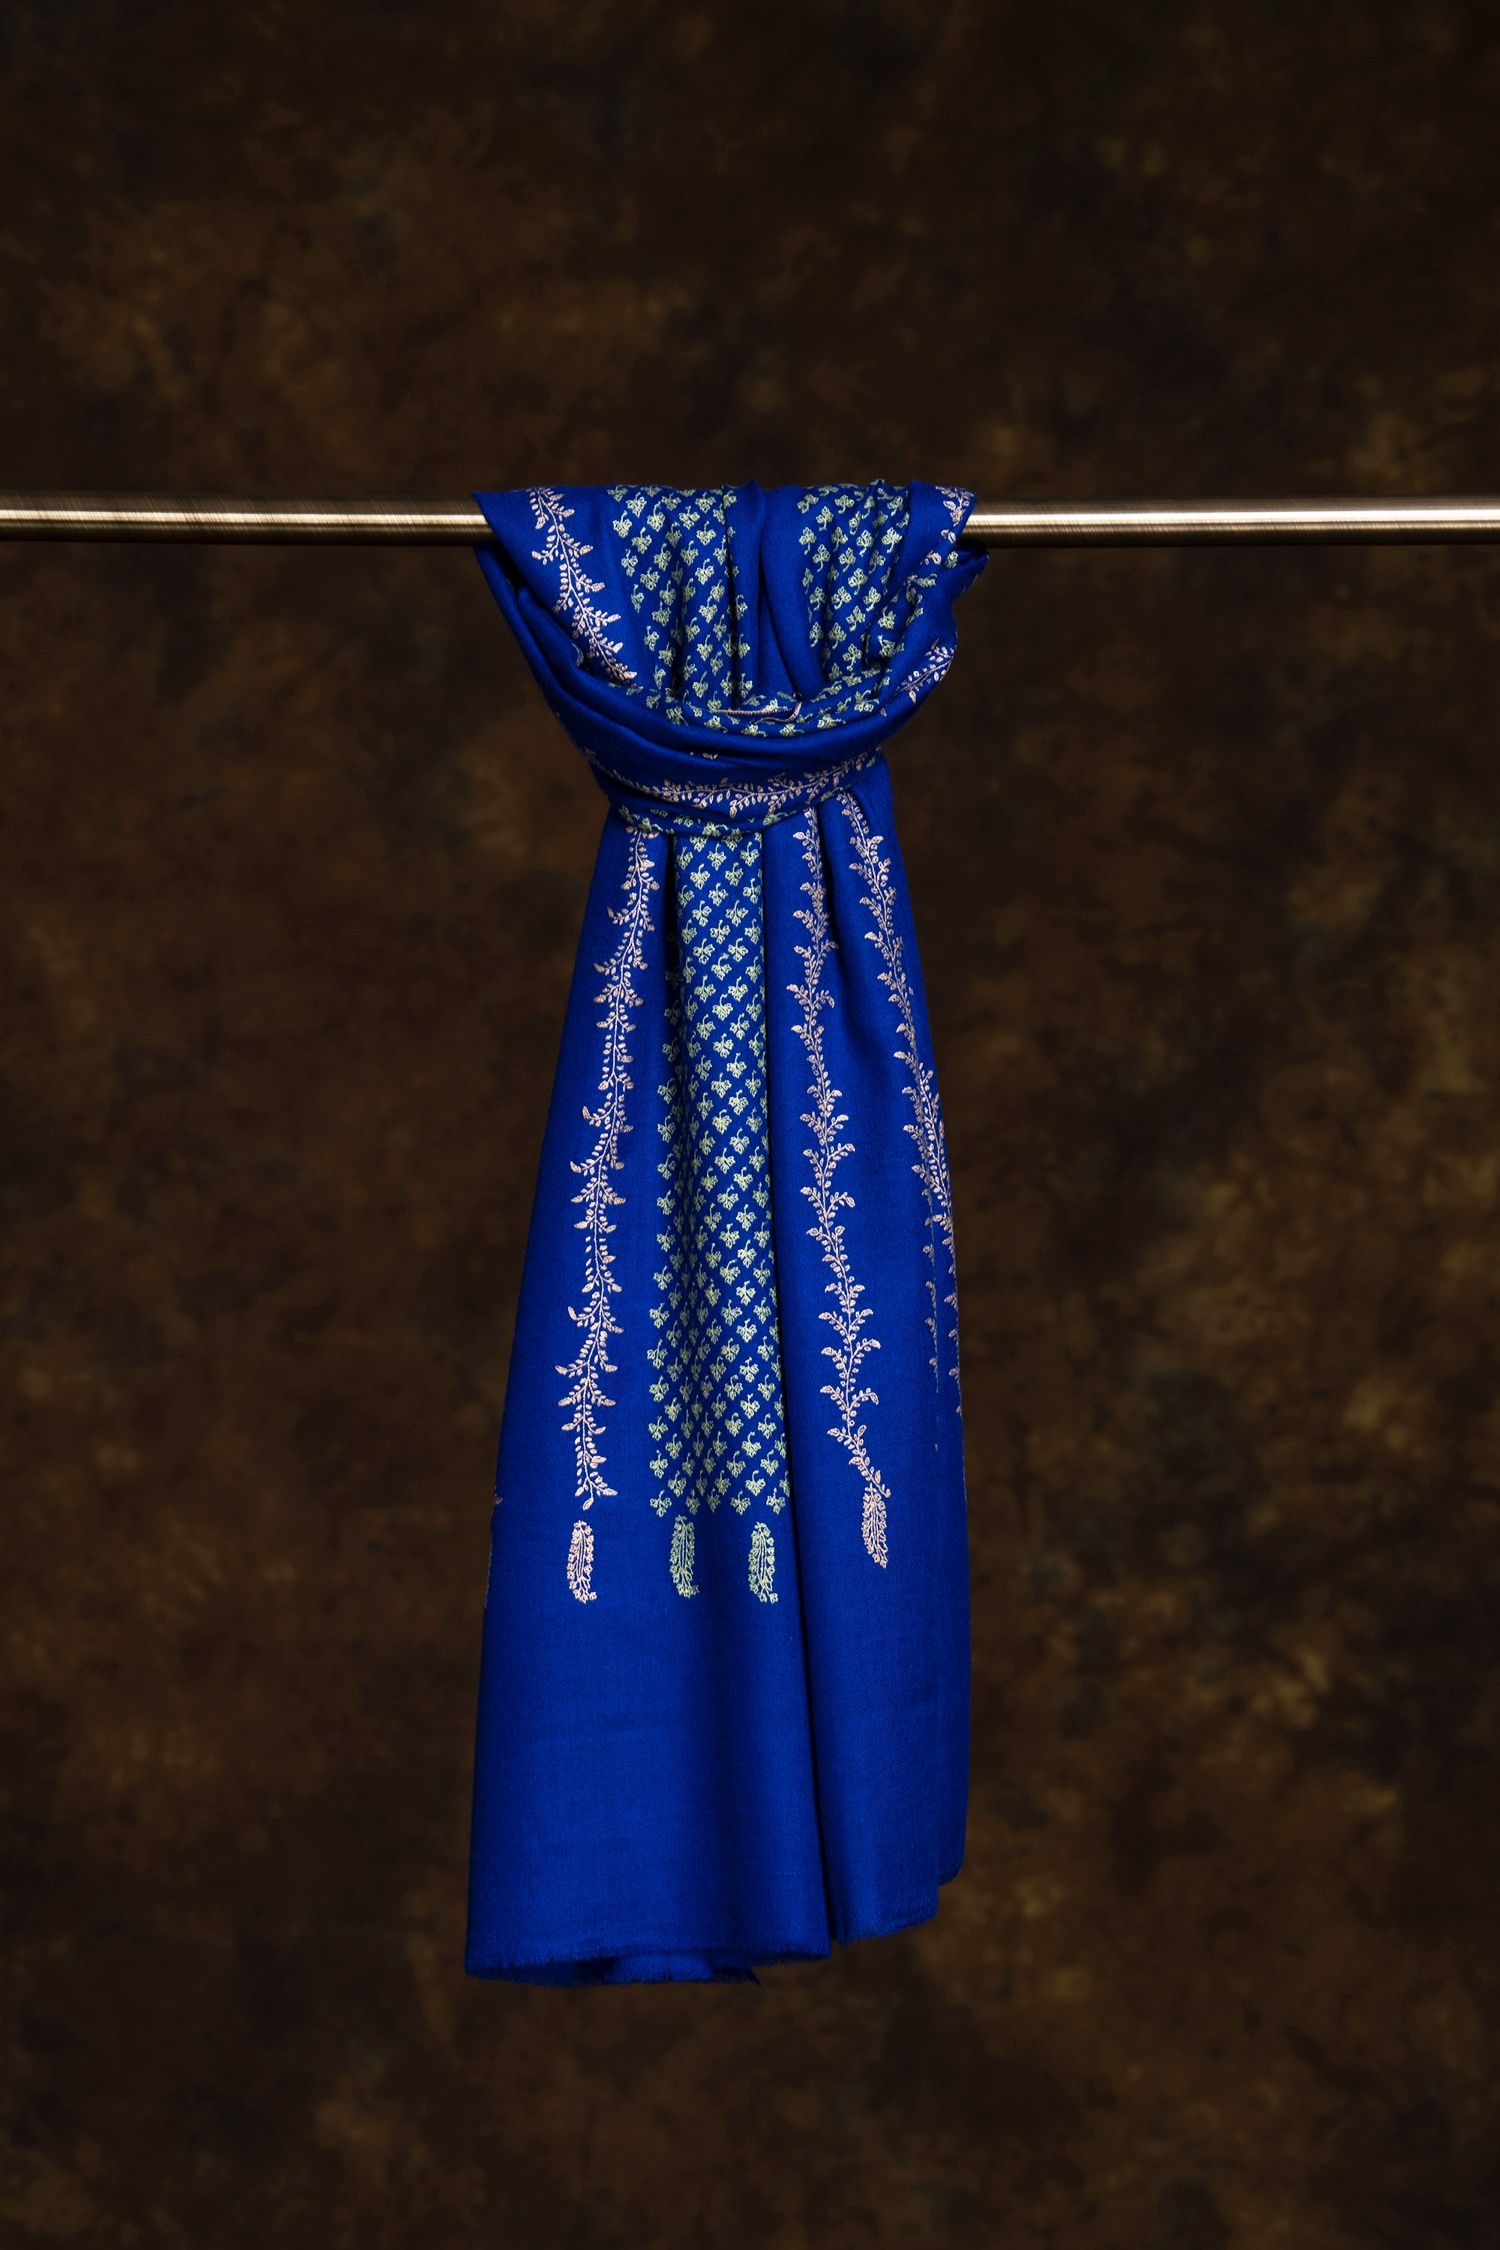 Beyond Waves Blue Cashmere Scarf